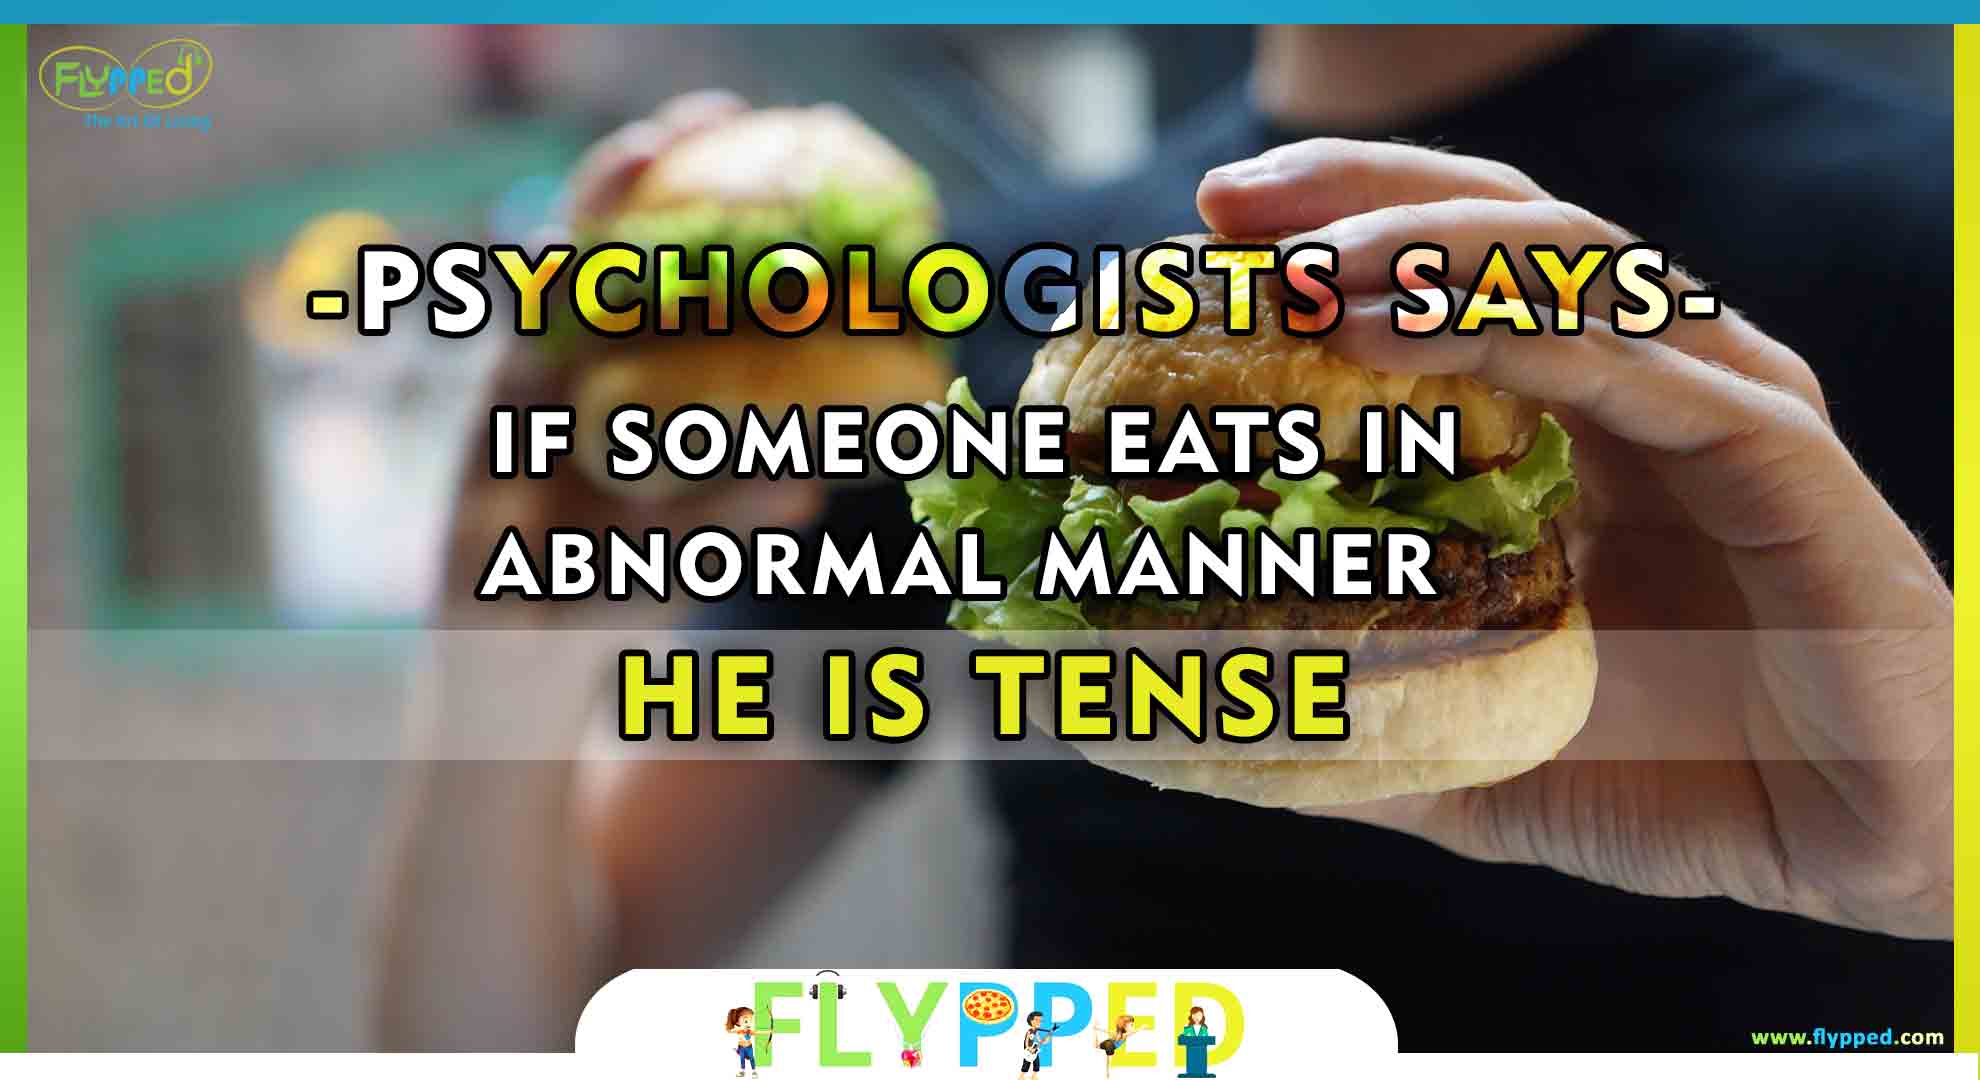 Psychologists-says-about-person4